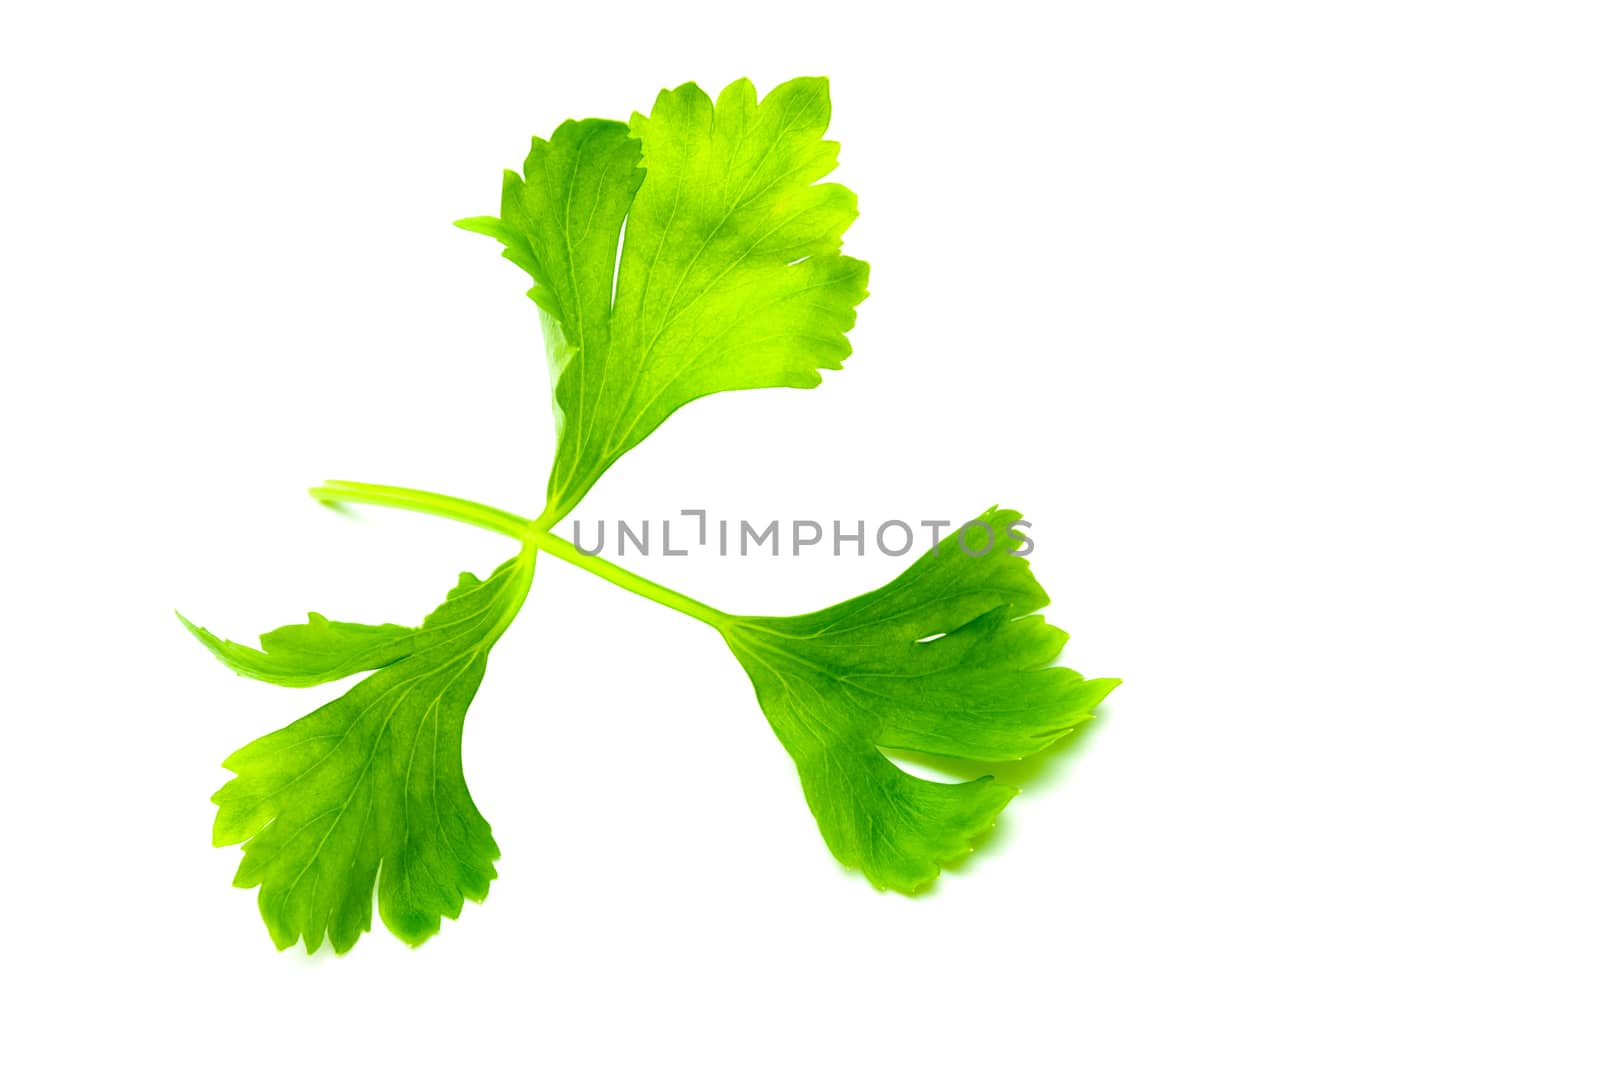 Green Celery leaves isolated on white background. Top view and close up of Celery leaves.